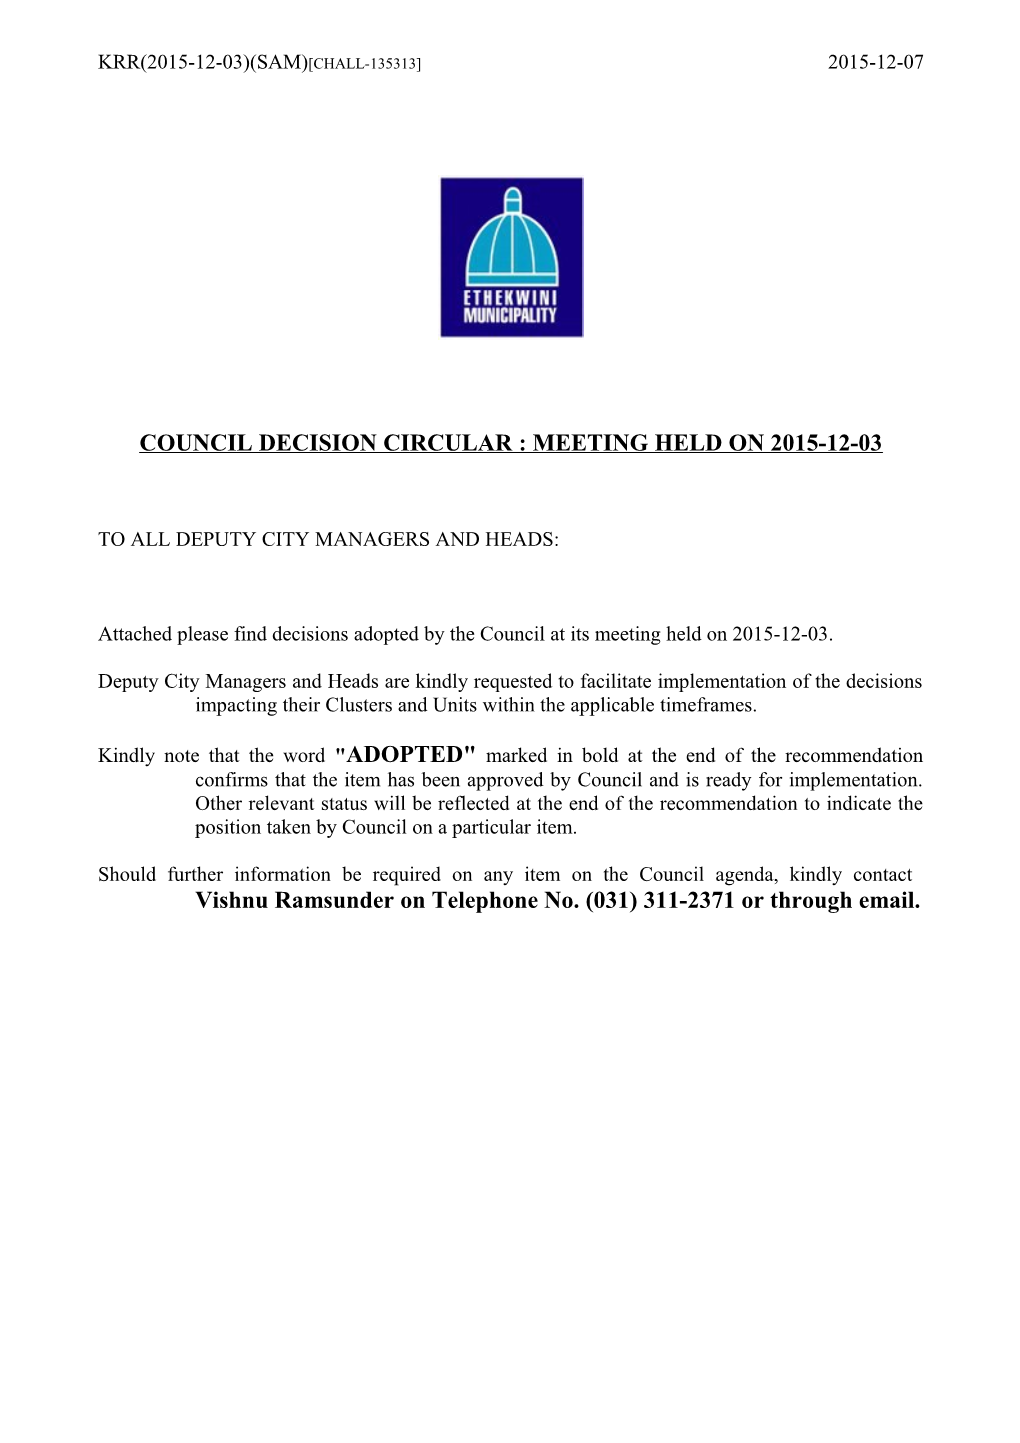 Council Decision Circular : Meeting Held on 2015-12-03